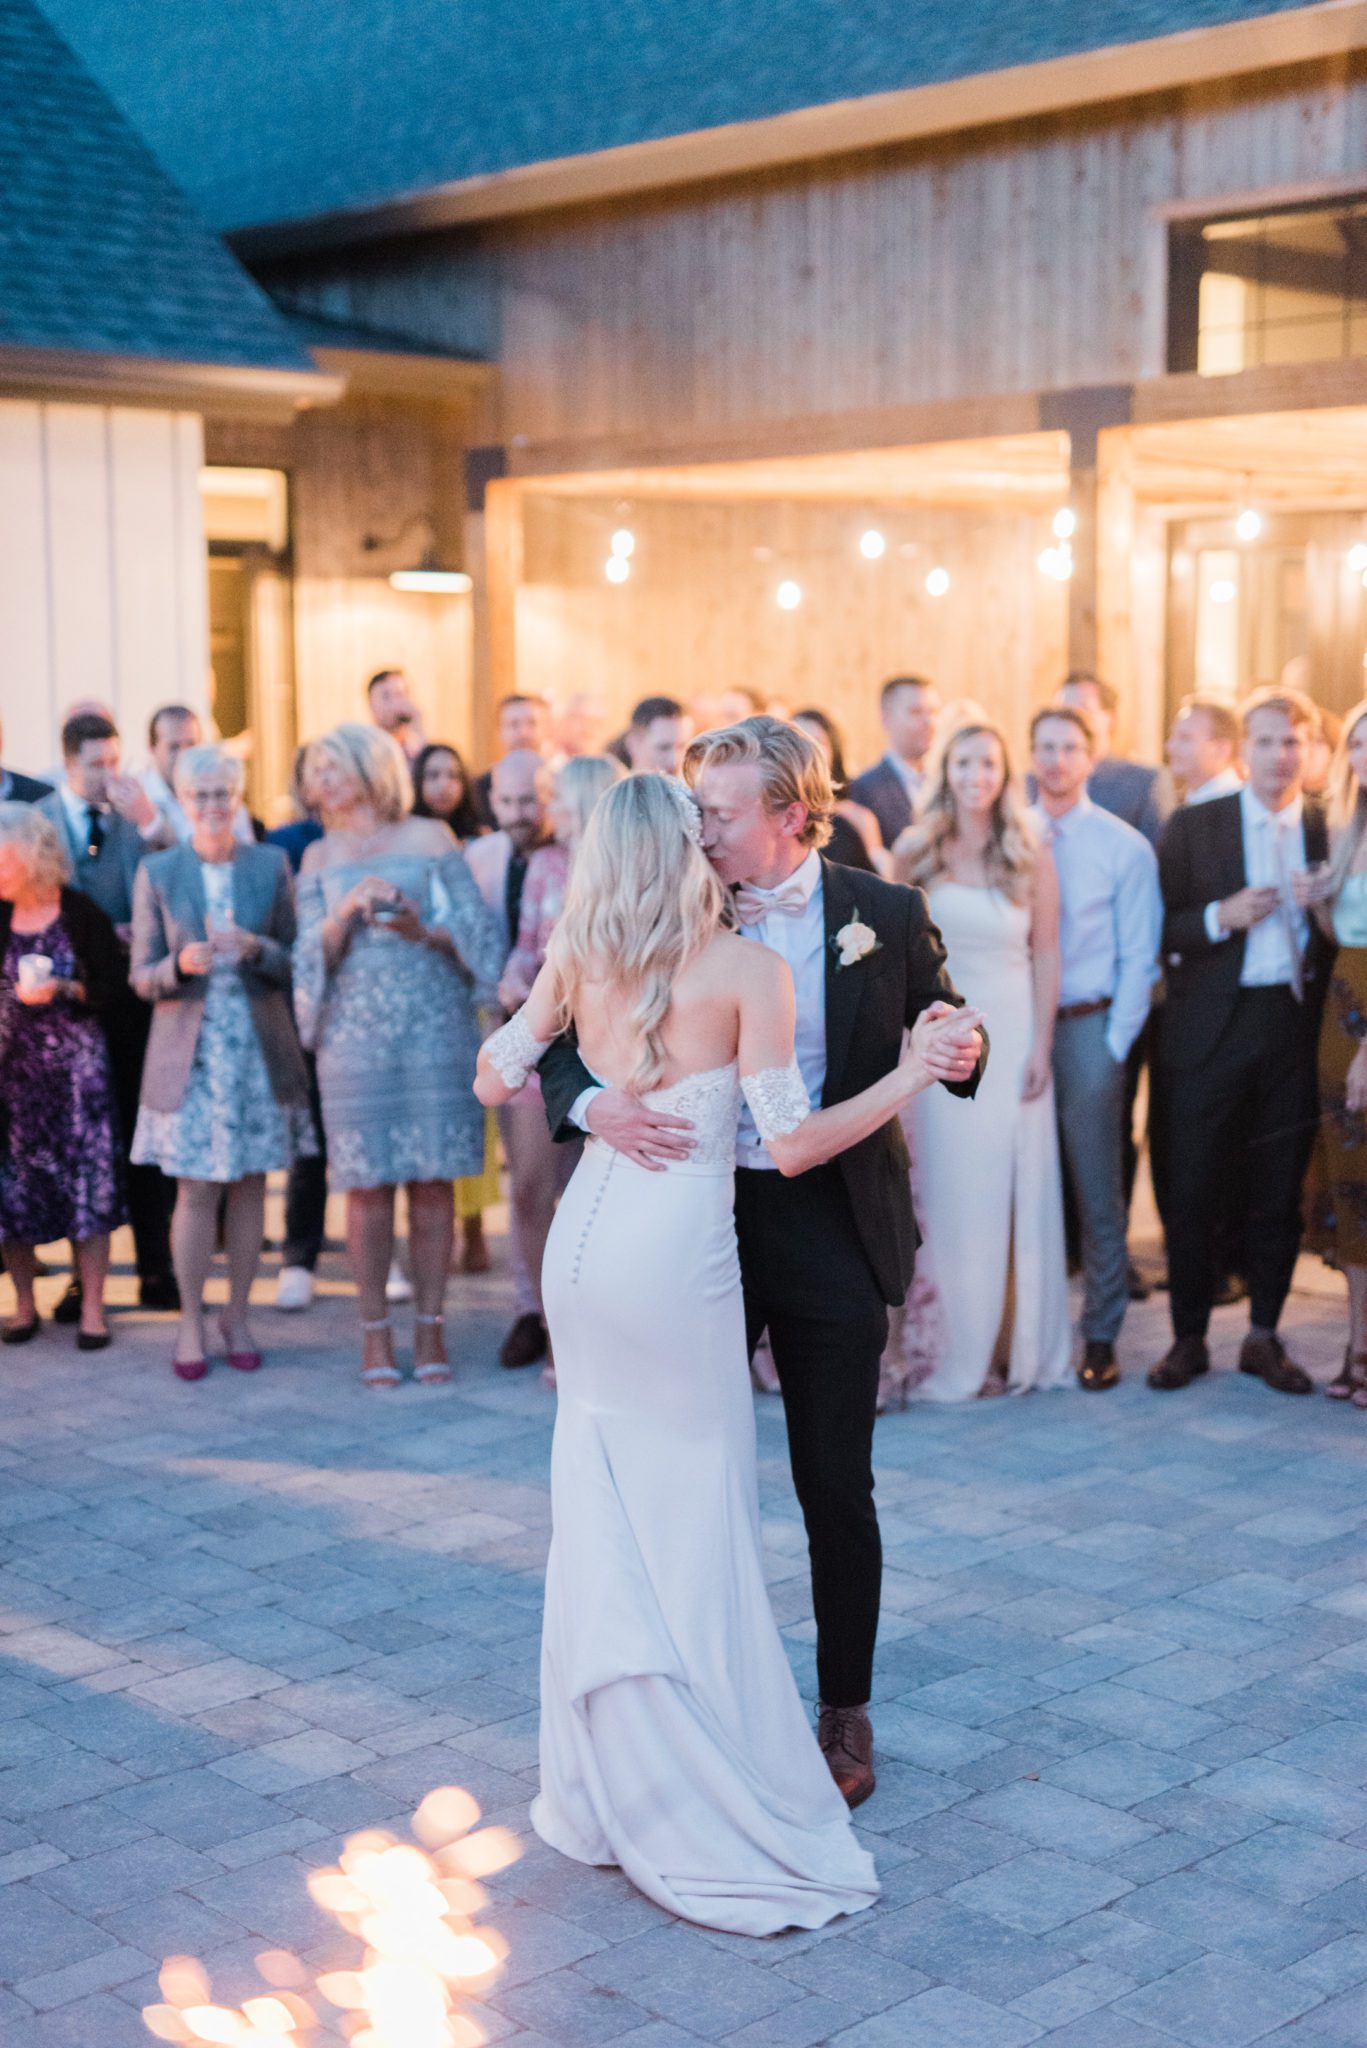 First dance with sparklers at an outdoor barn venue